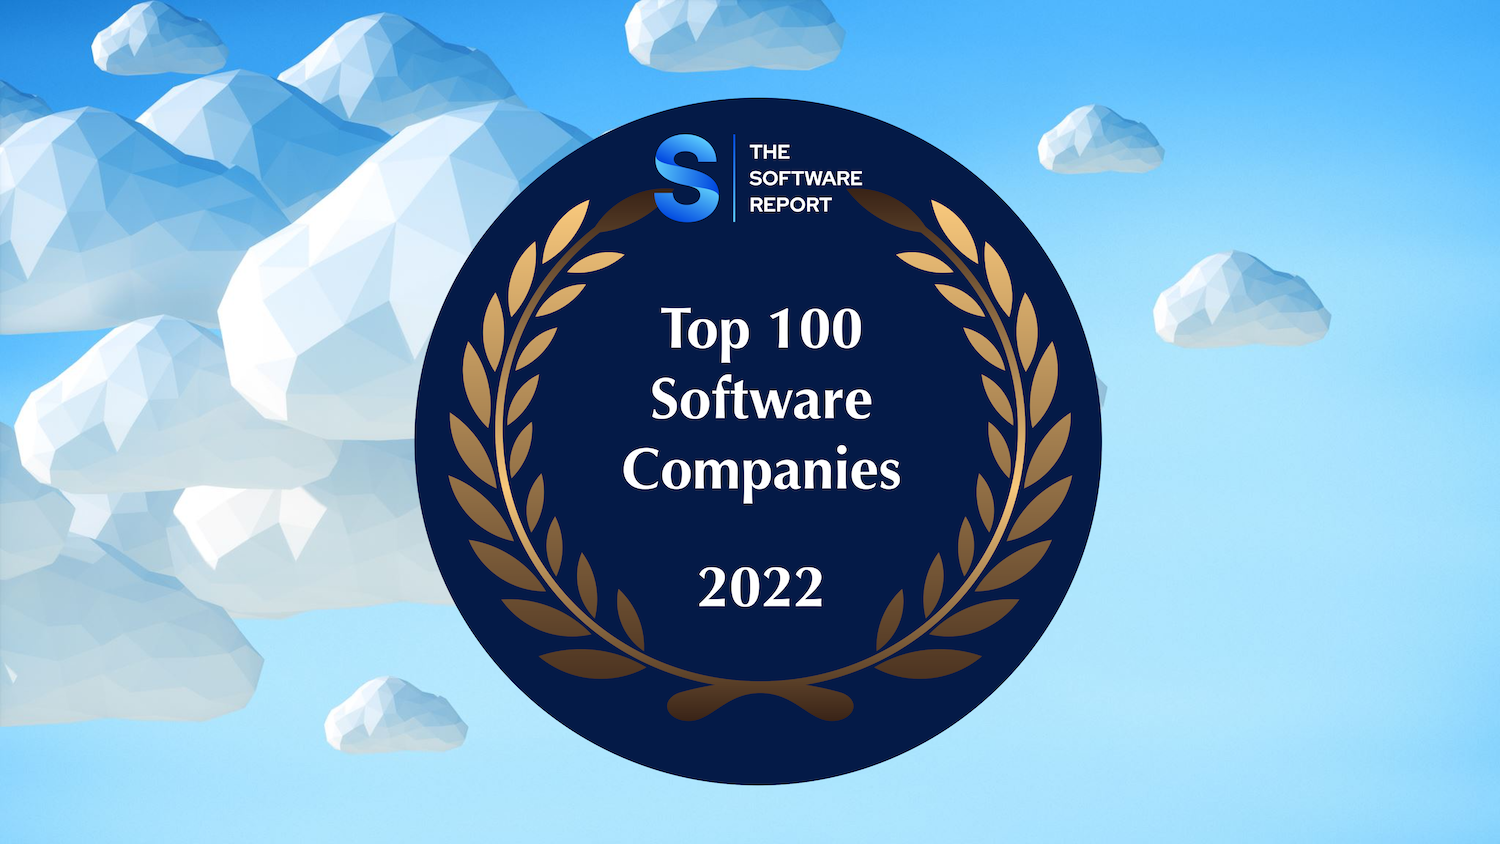 The Top 100 Software Companies of 2022 | The Software Report